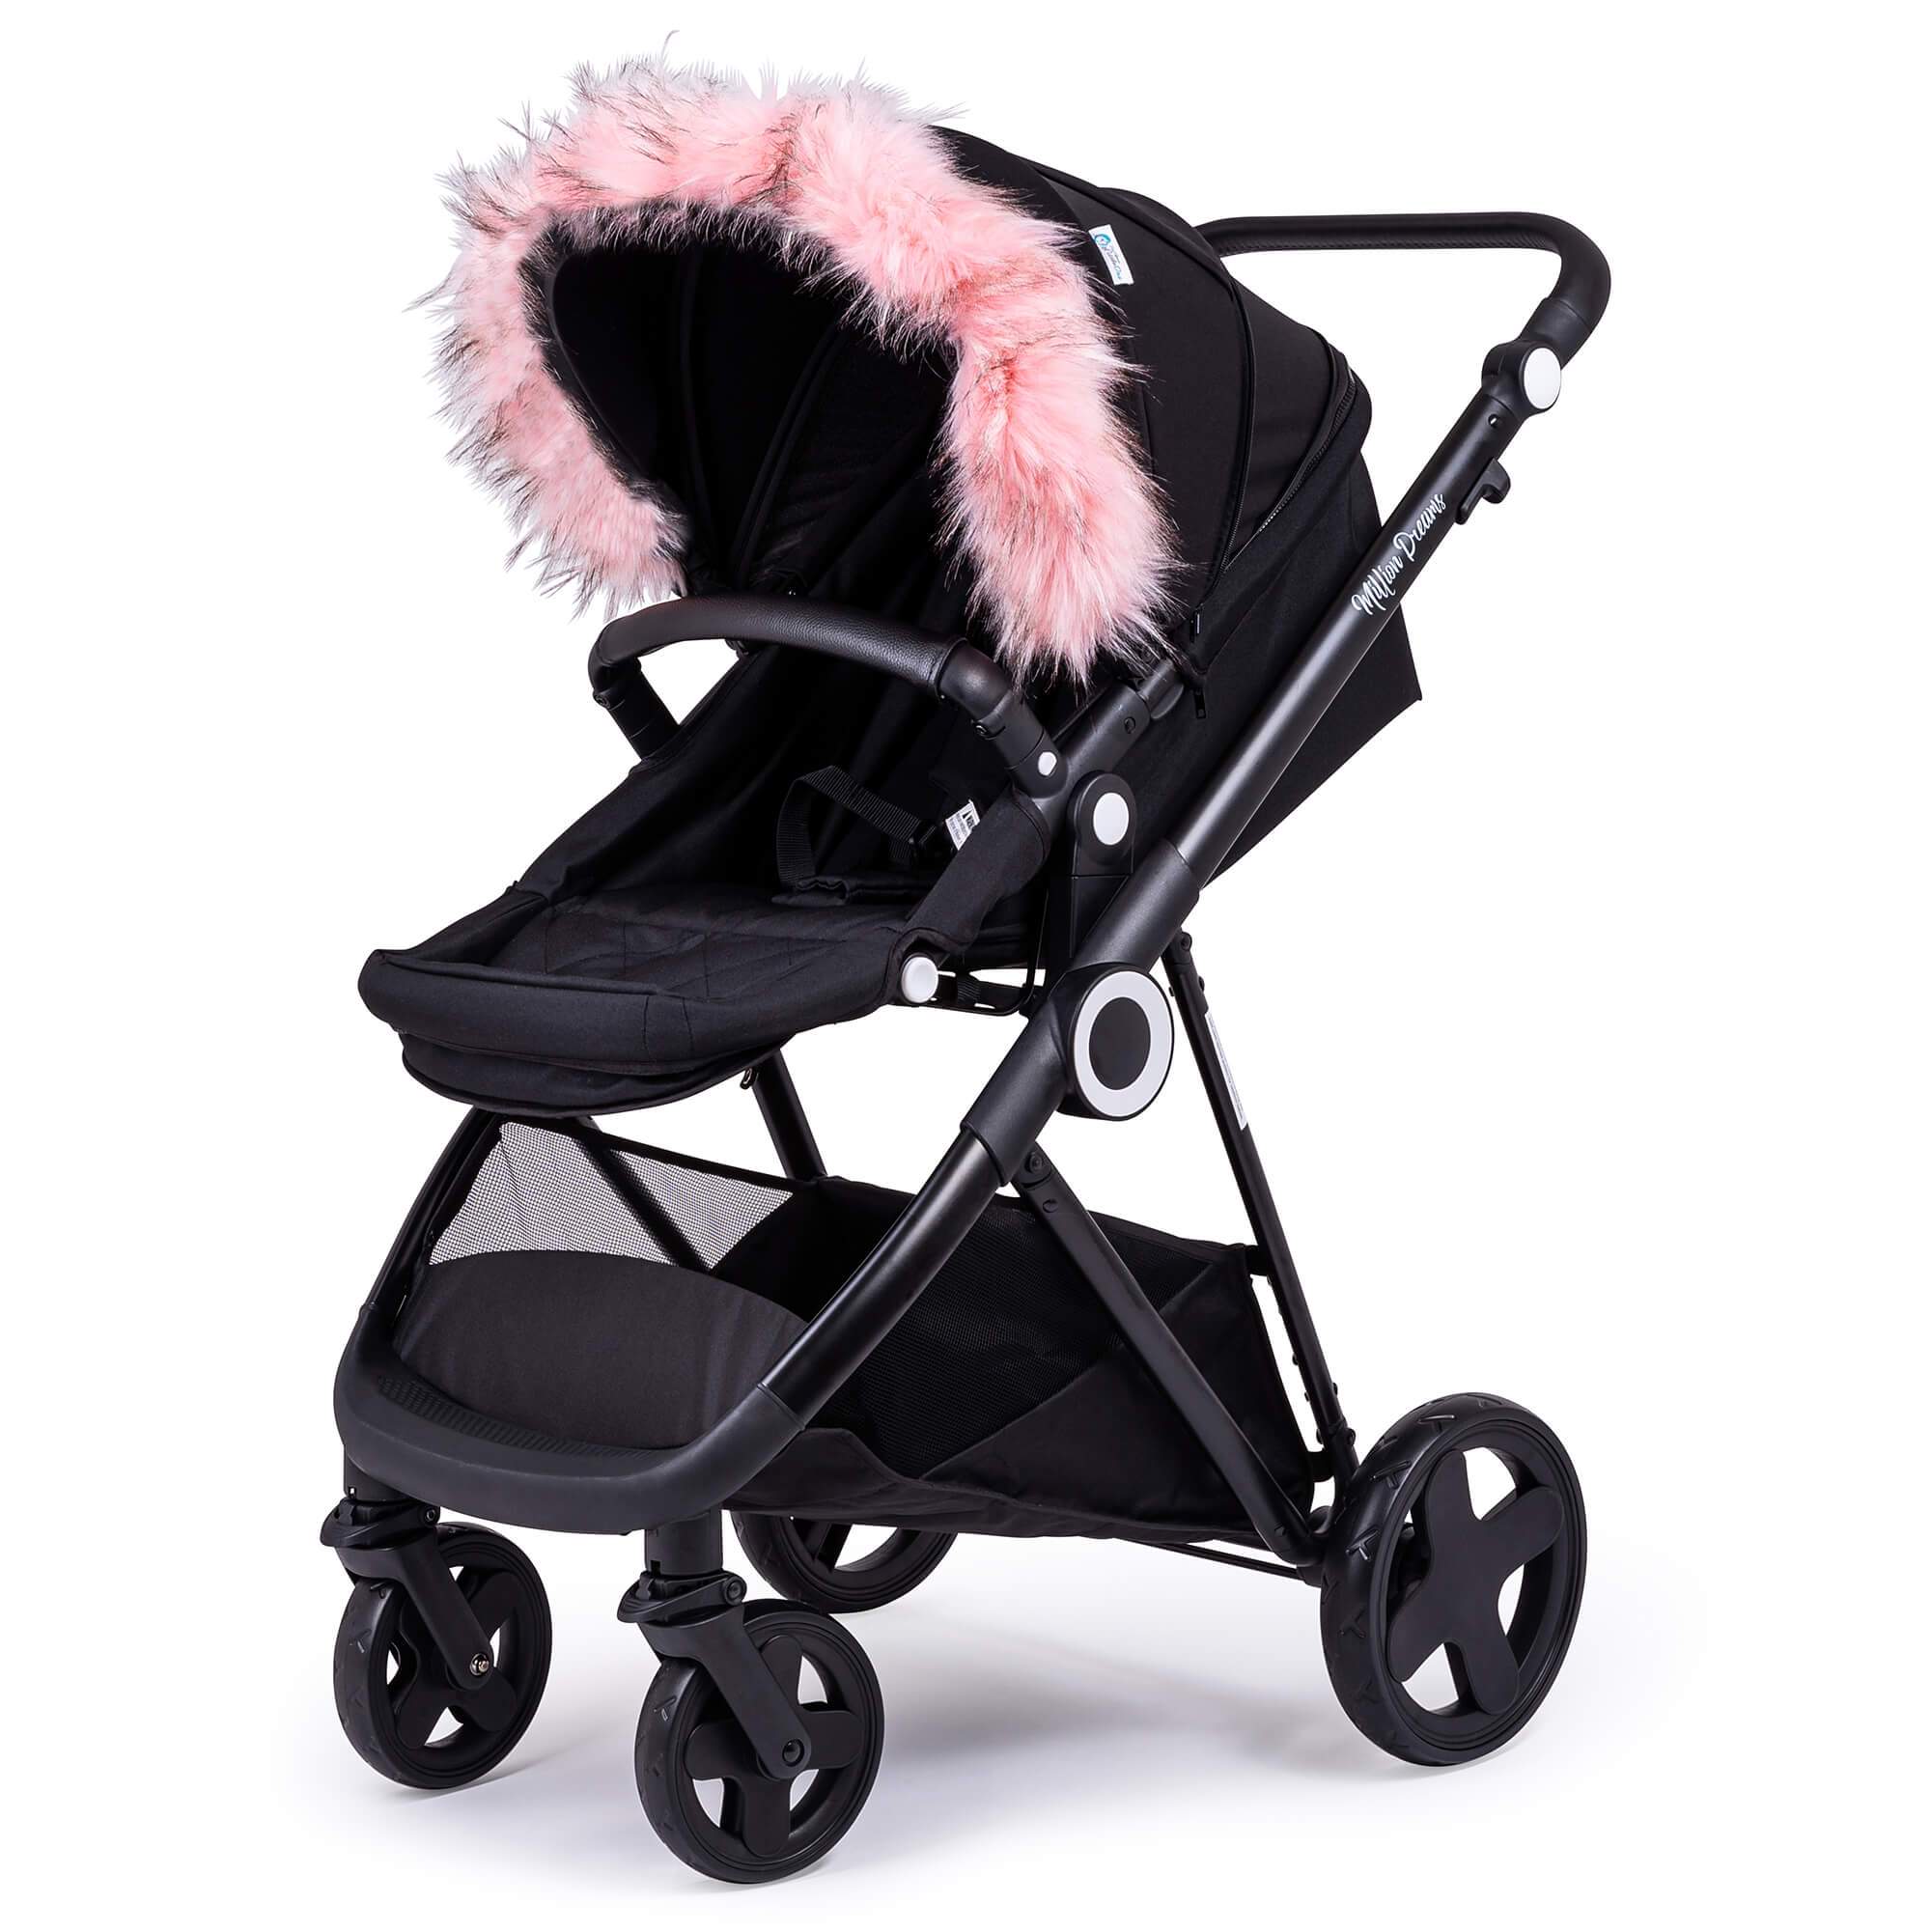 Pram Fur Hood Trim Attachment for Pushchair Compatible with Recaro - For Your Little One